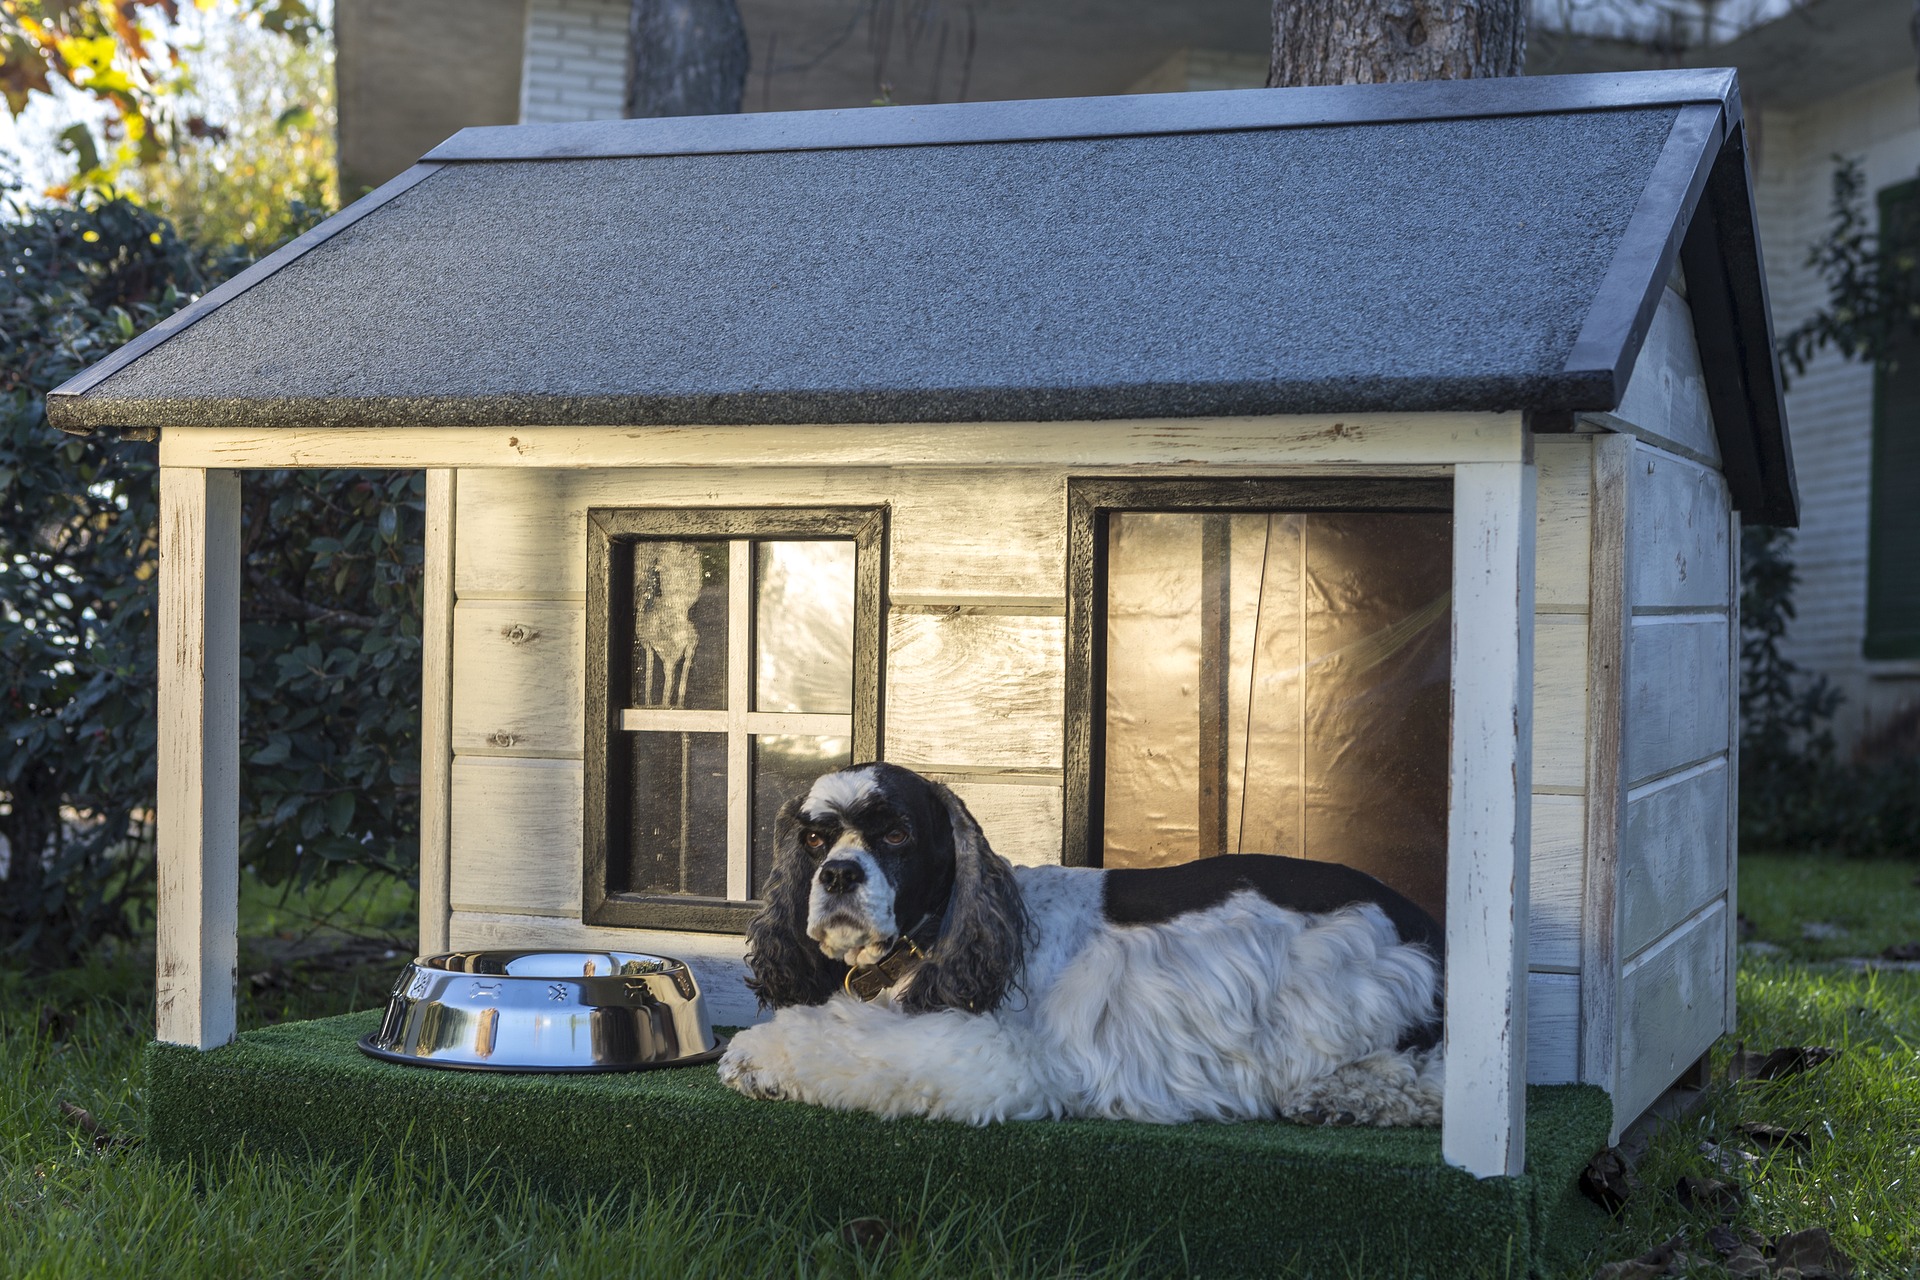 Best Dog House for Hot Weather - The 